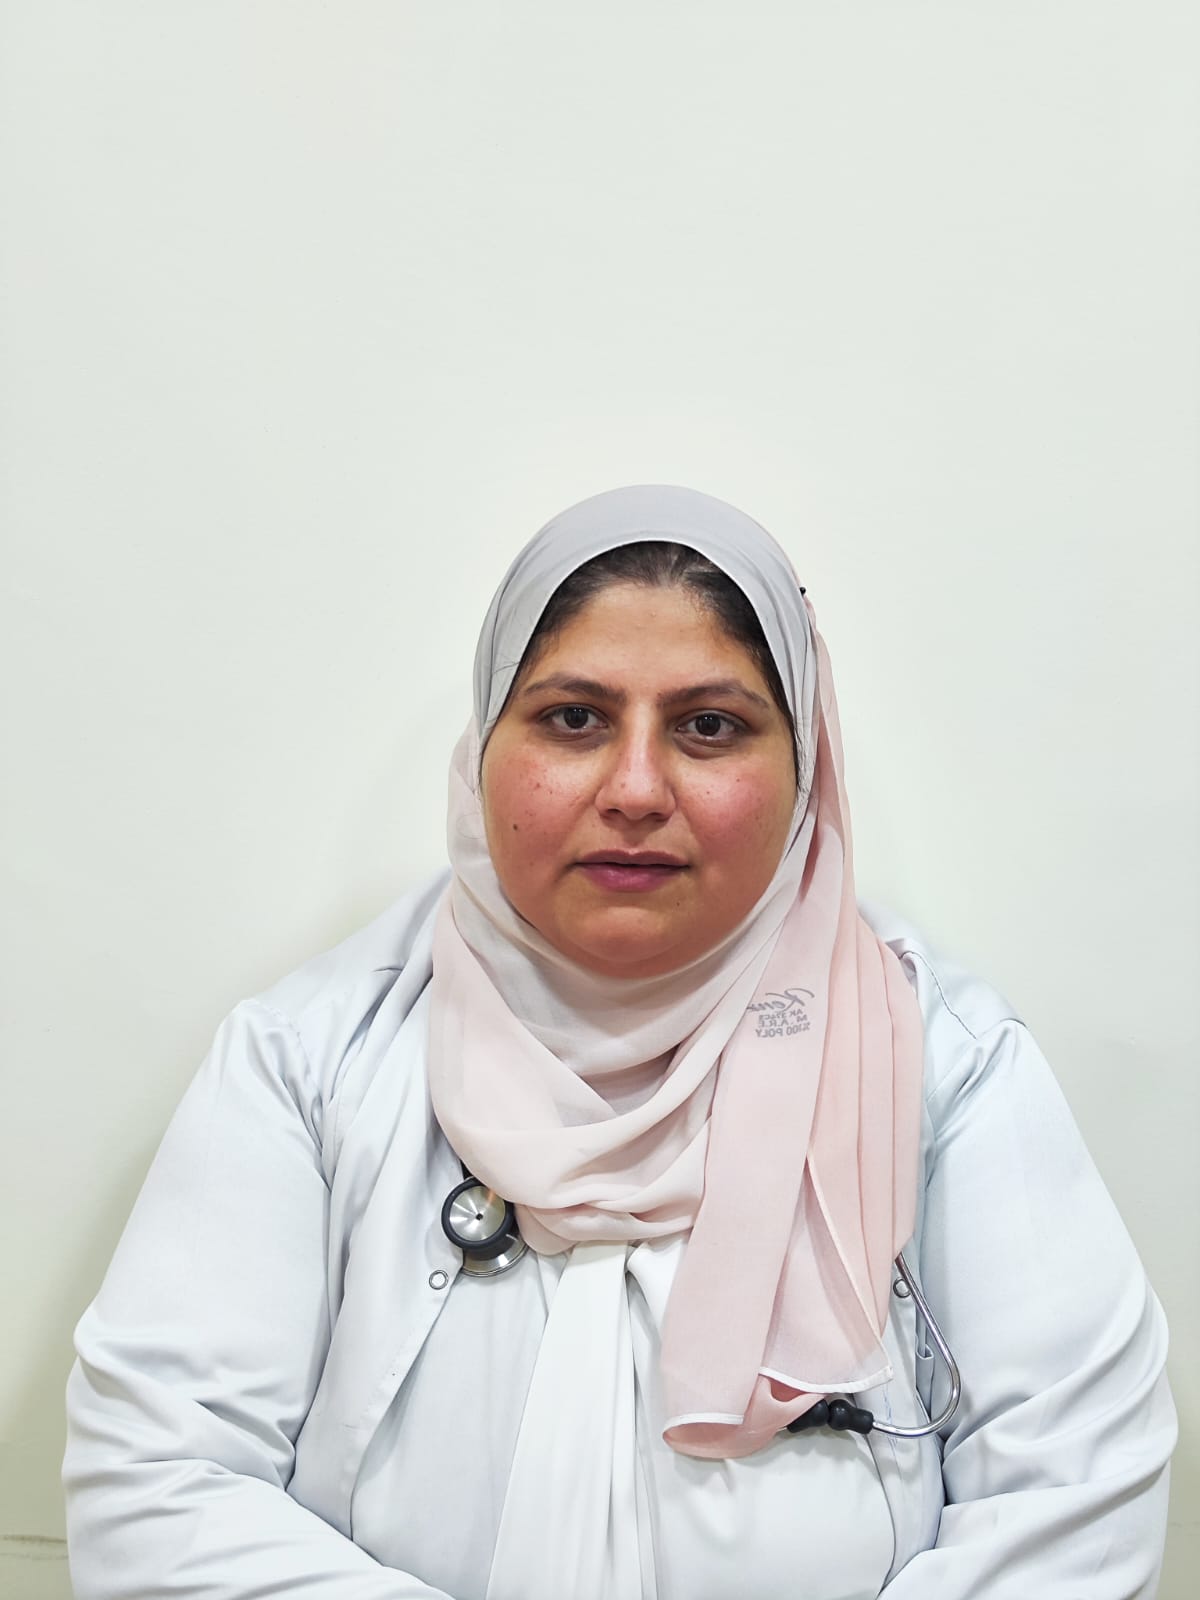 Dr. Amani Mohammed